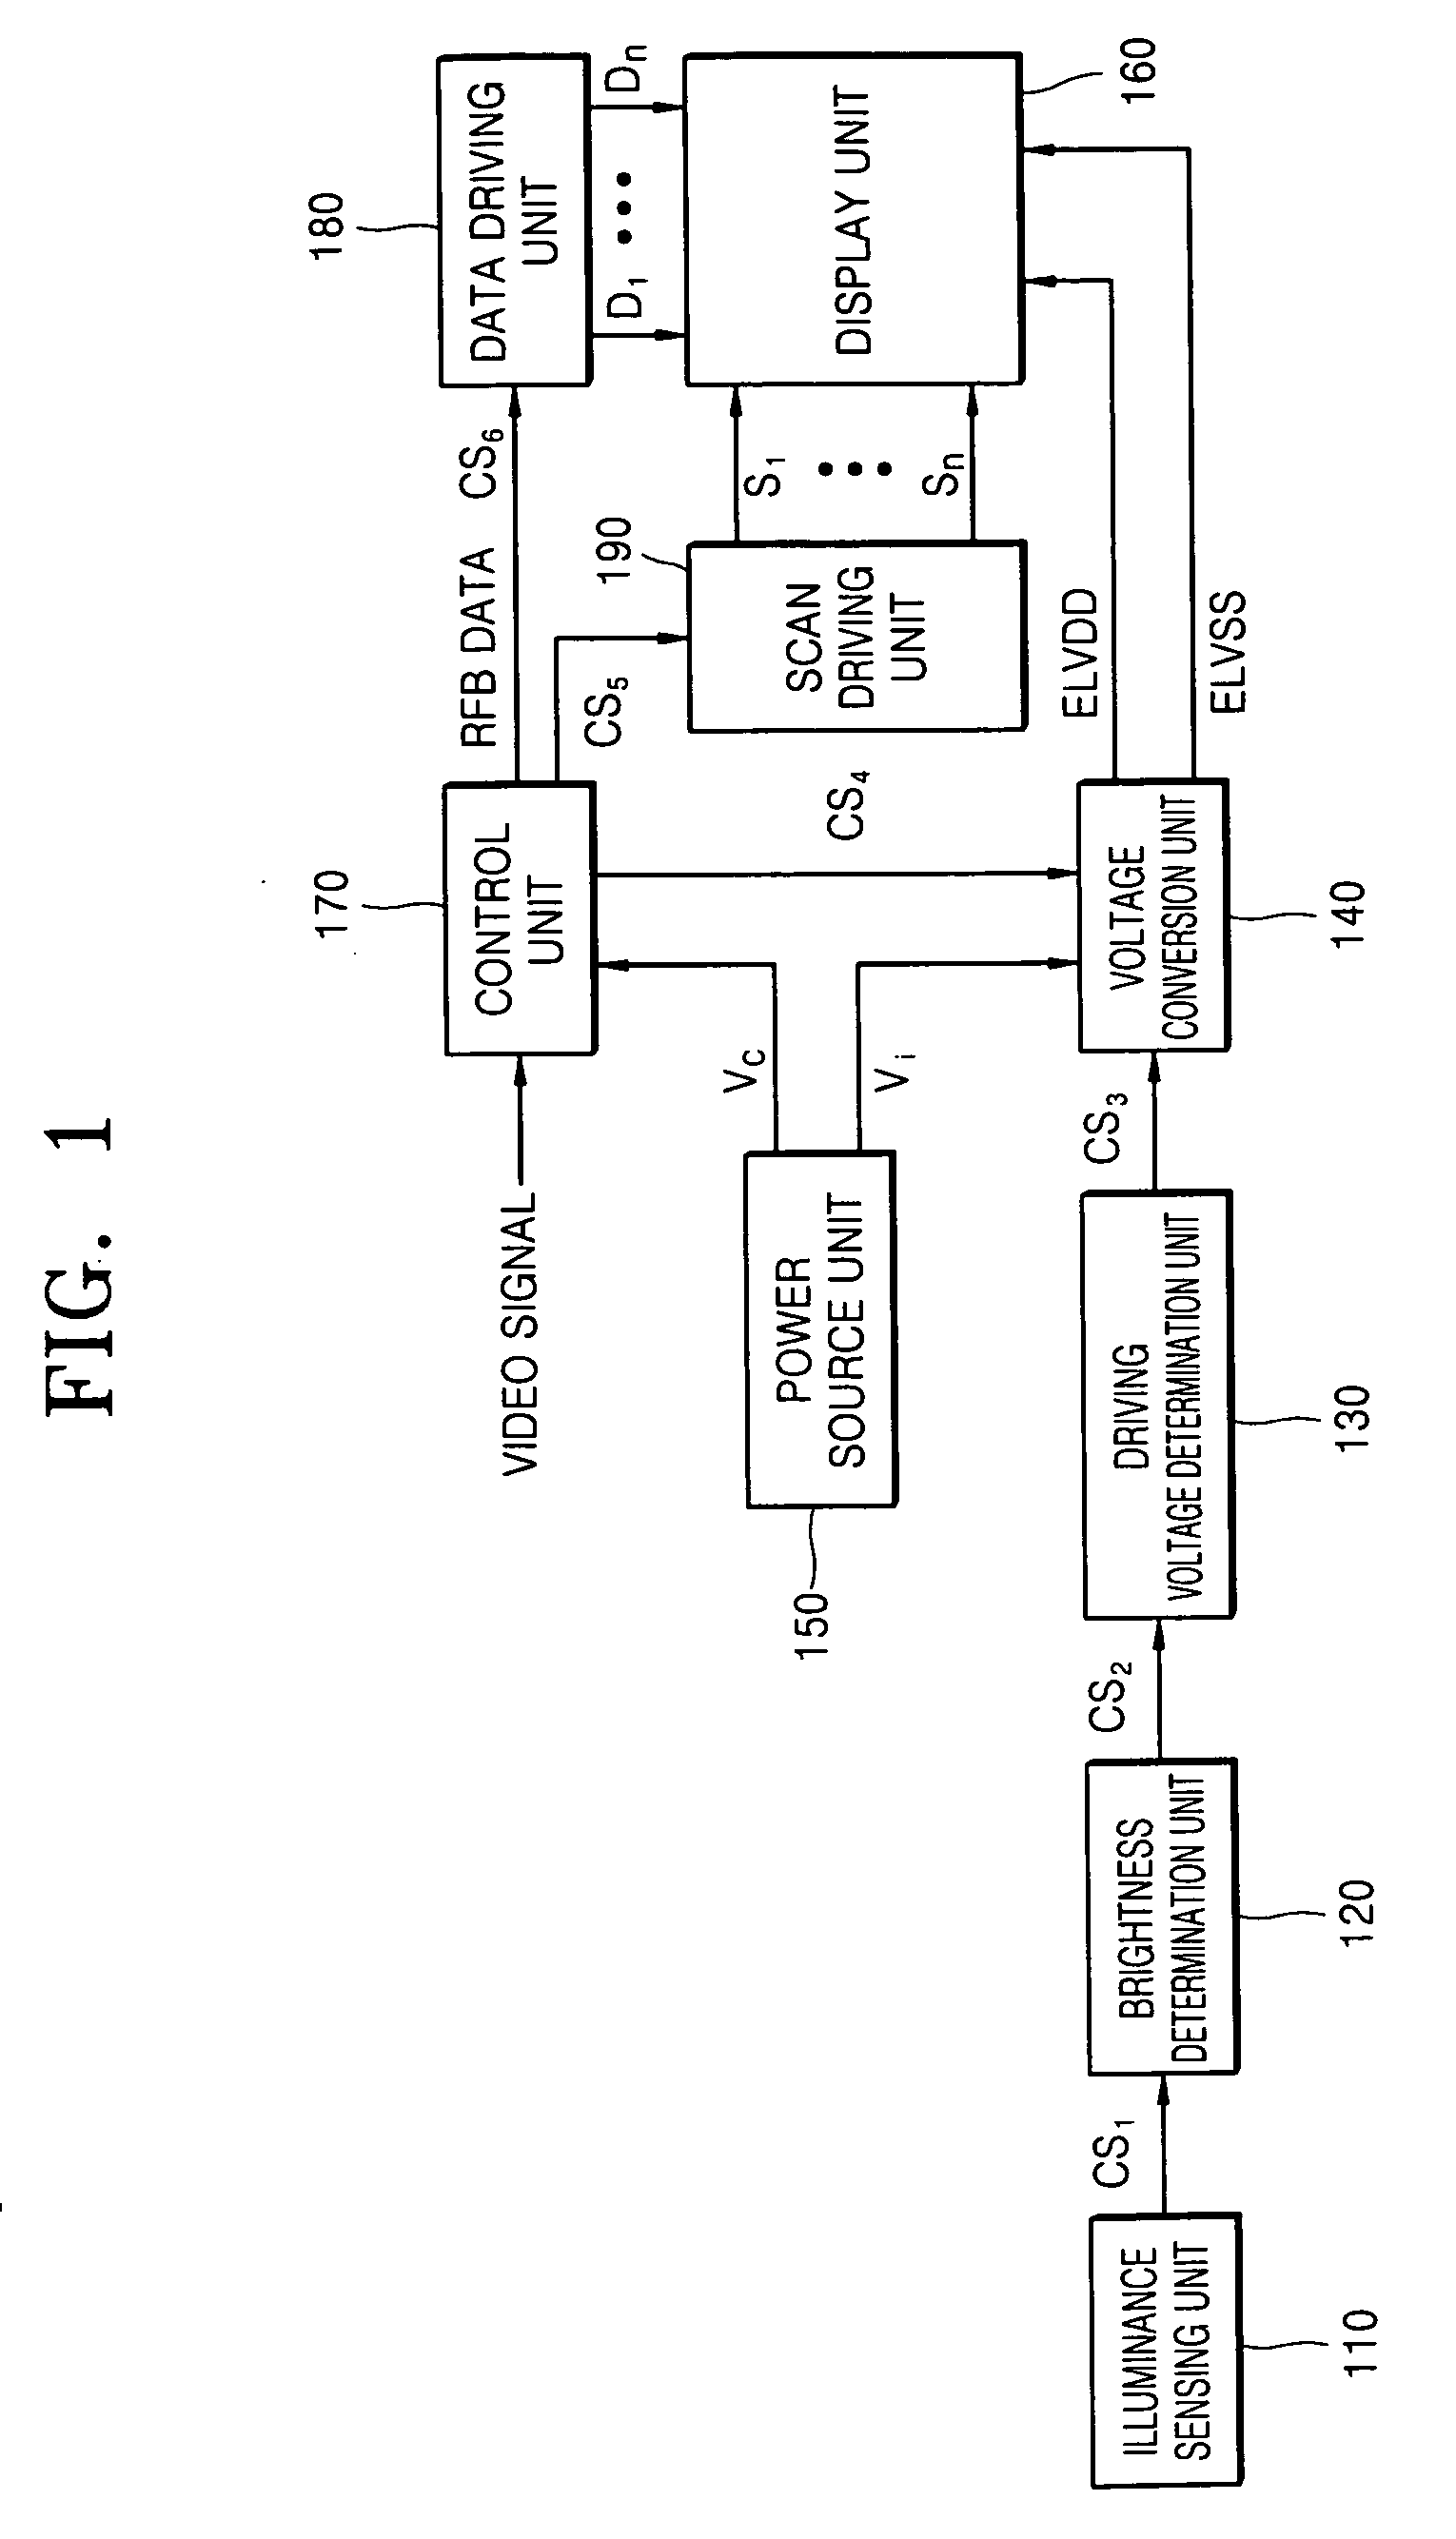 Organic light emitting diode (OLED) display and a method of driving the same